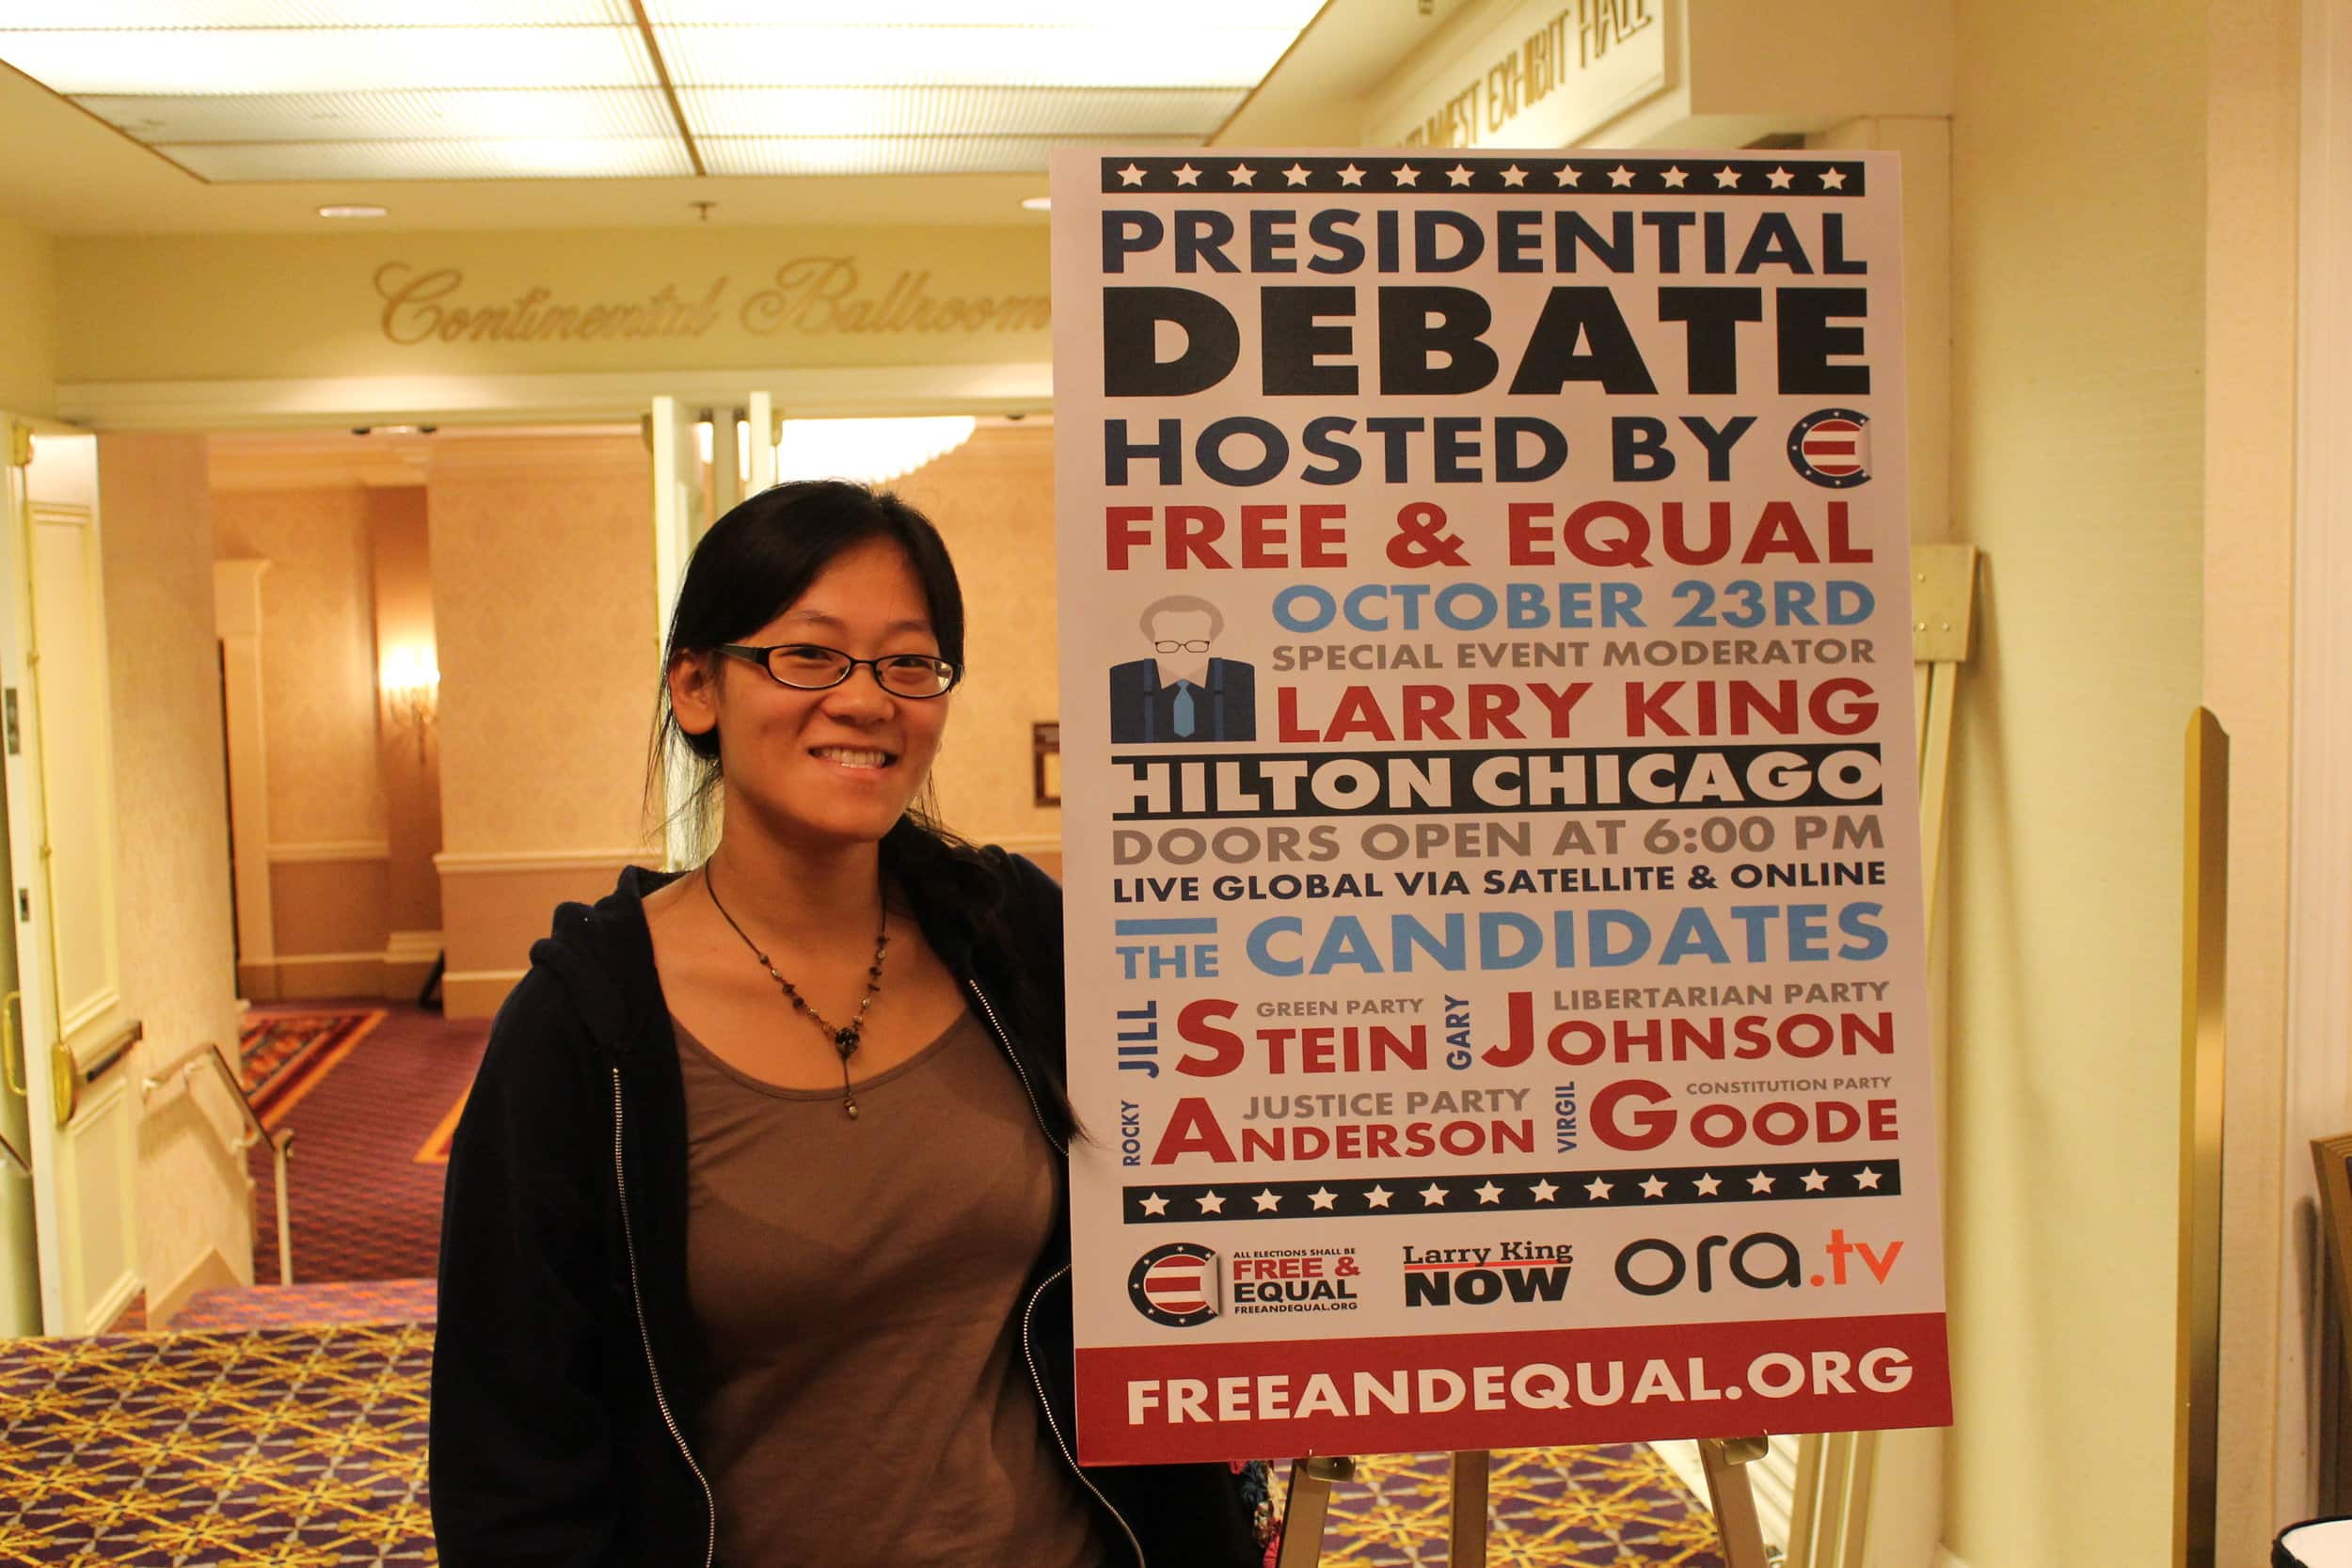 Sign promoting Third-Party Presidential Debate between Green Party candidate Jill Stein and Libertarian Party candidate Gary Johnson on October 23, 2012.